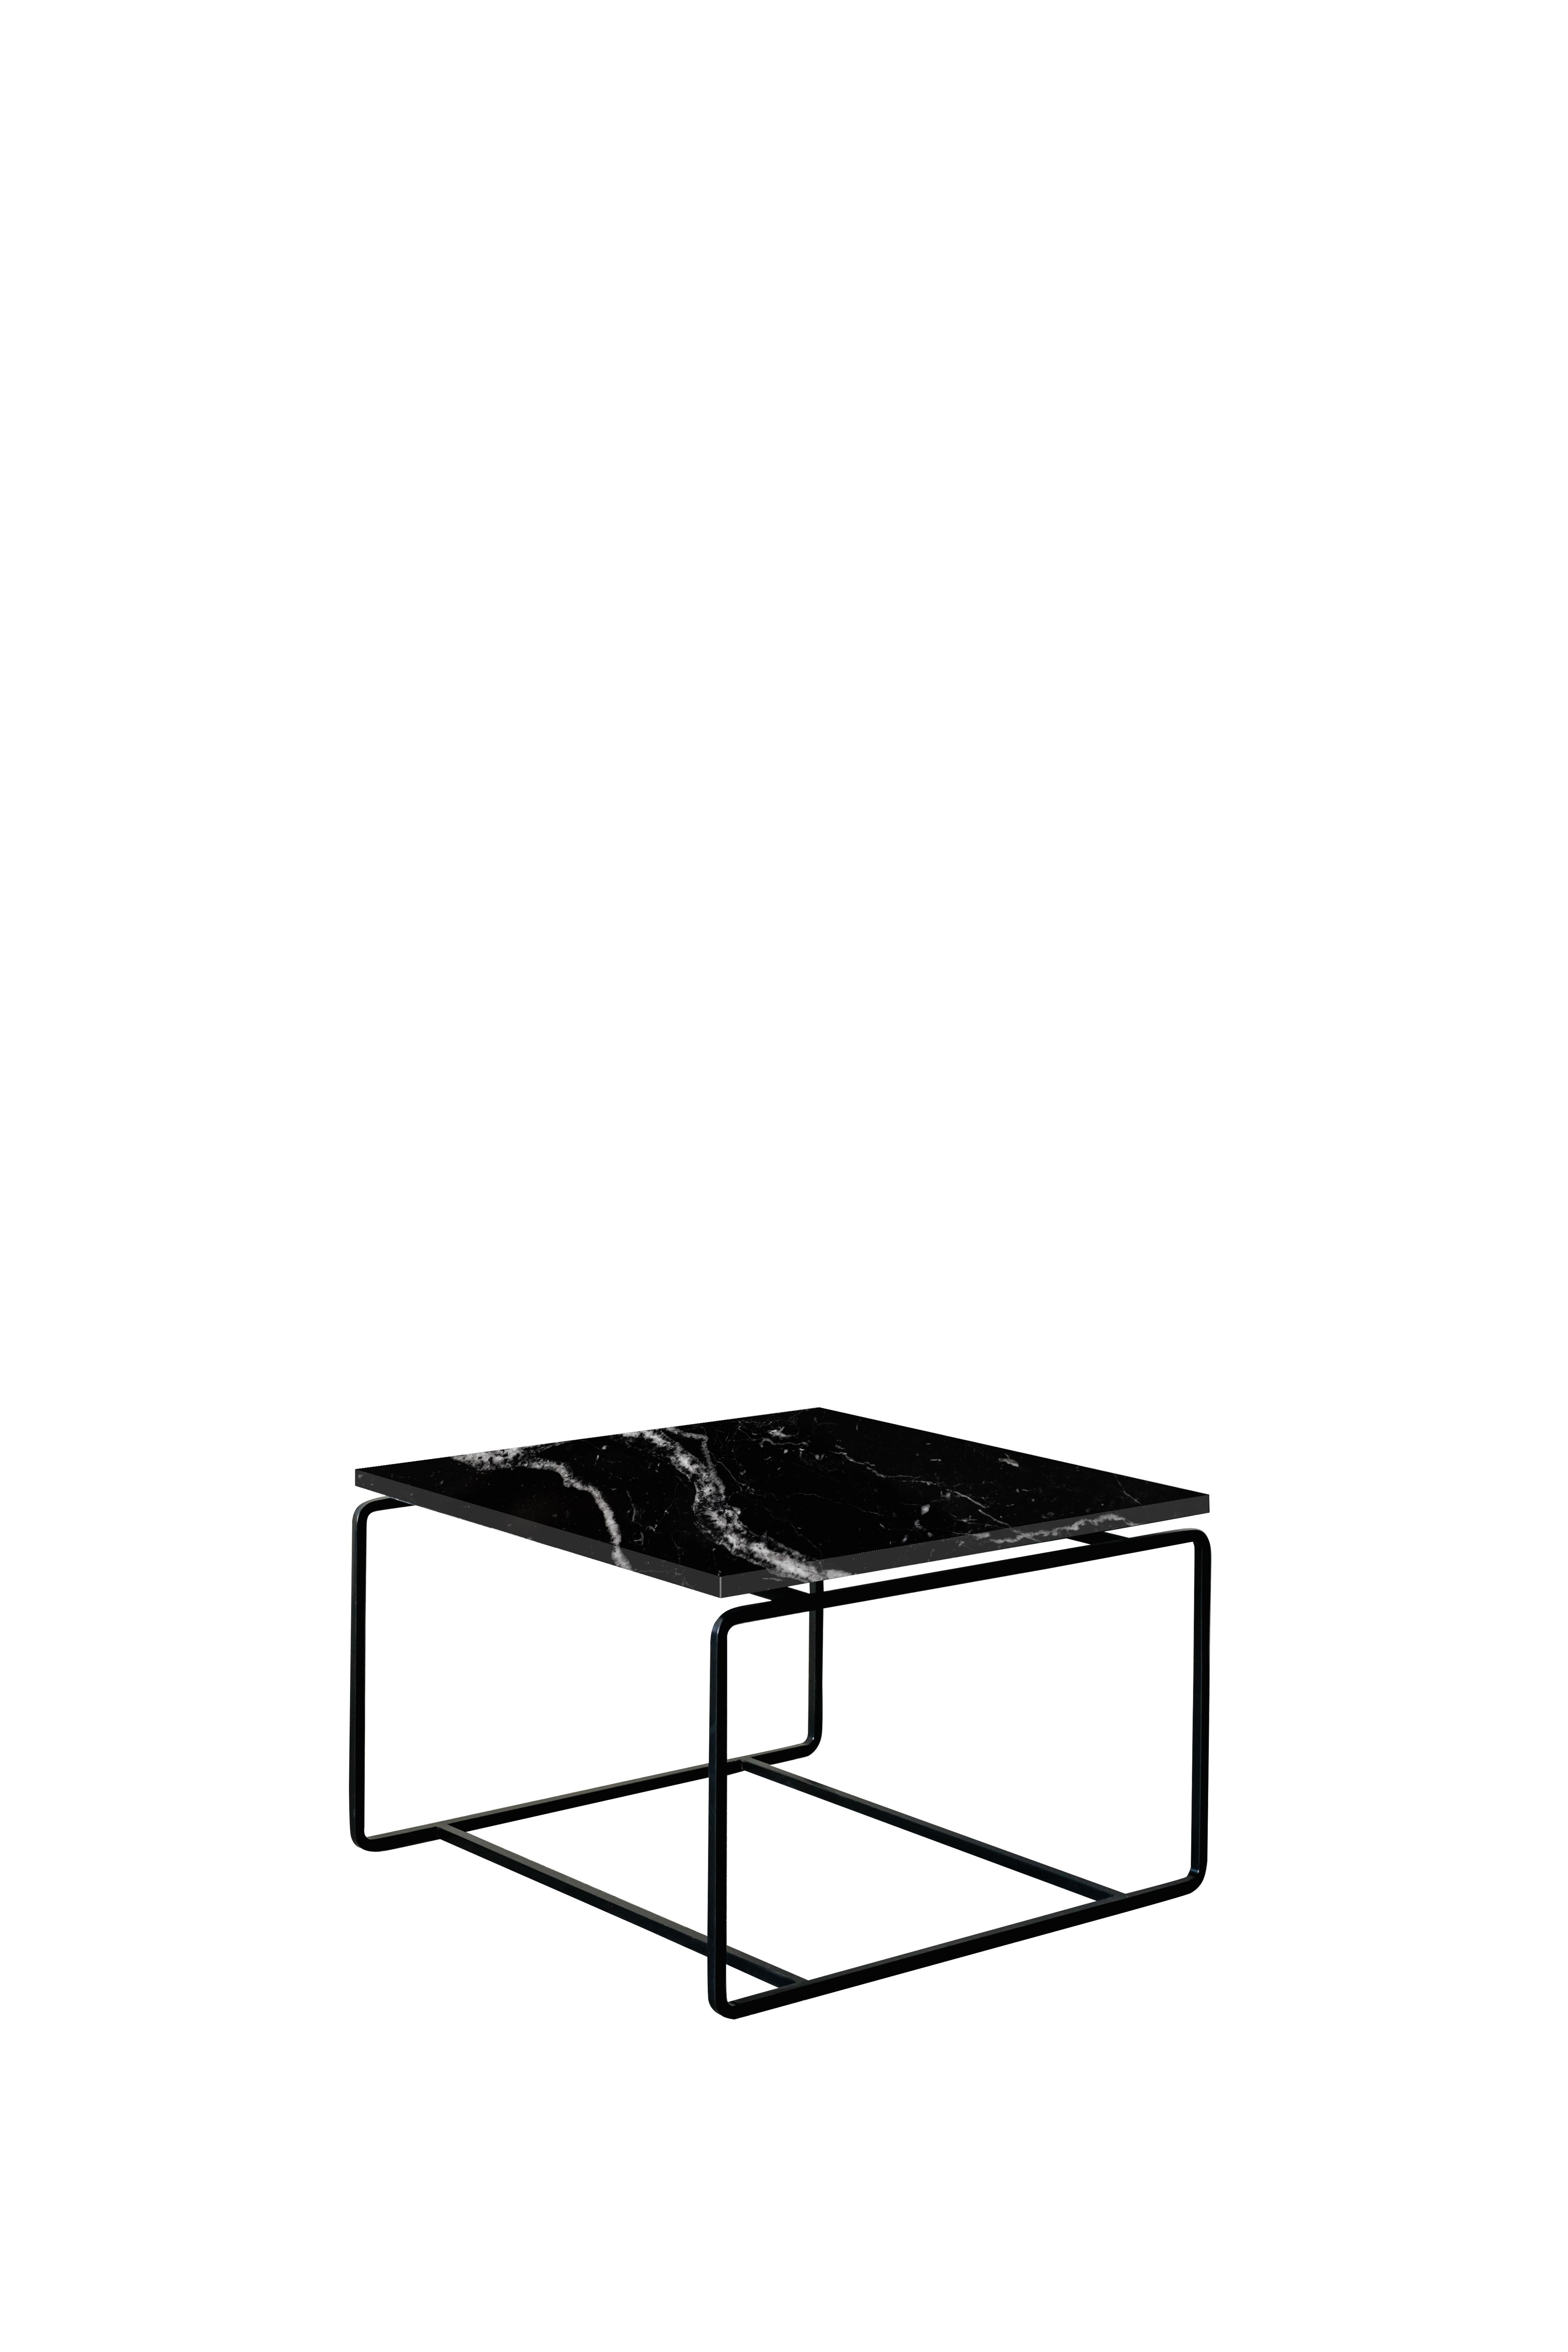 Nero Marquina Form A Coffee Table by Un’common
Dimensions: W 60 x D 60 x H 37 cm
Materials: Marble
Also Available: Other finishes available

FORM is about giving fresh look by rounded corners and lifted marble tops. Every detail matters. In that